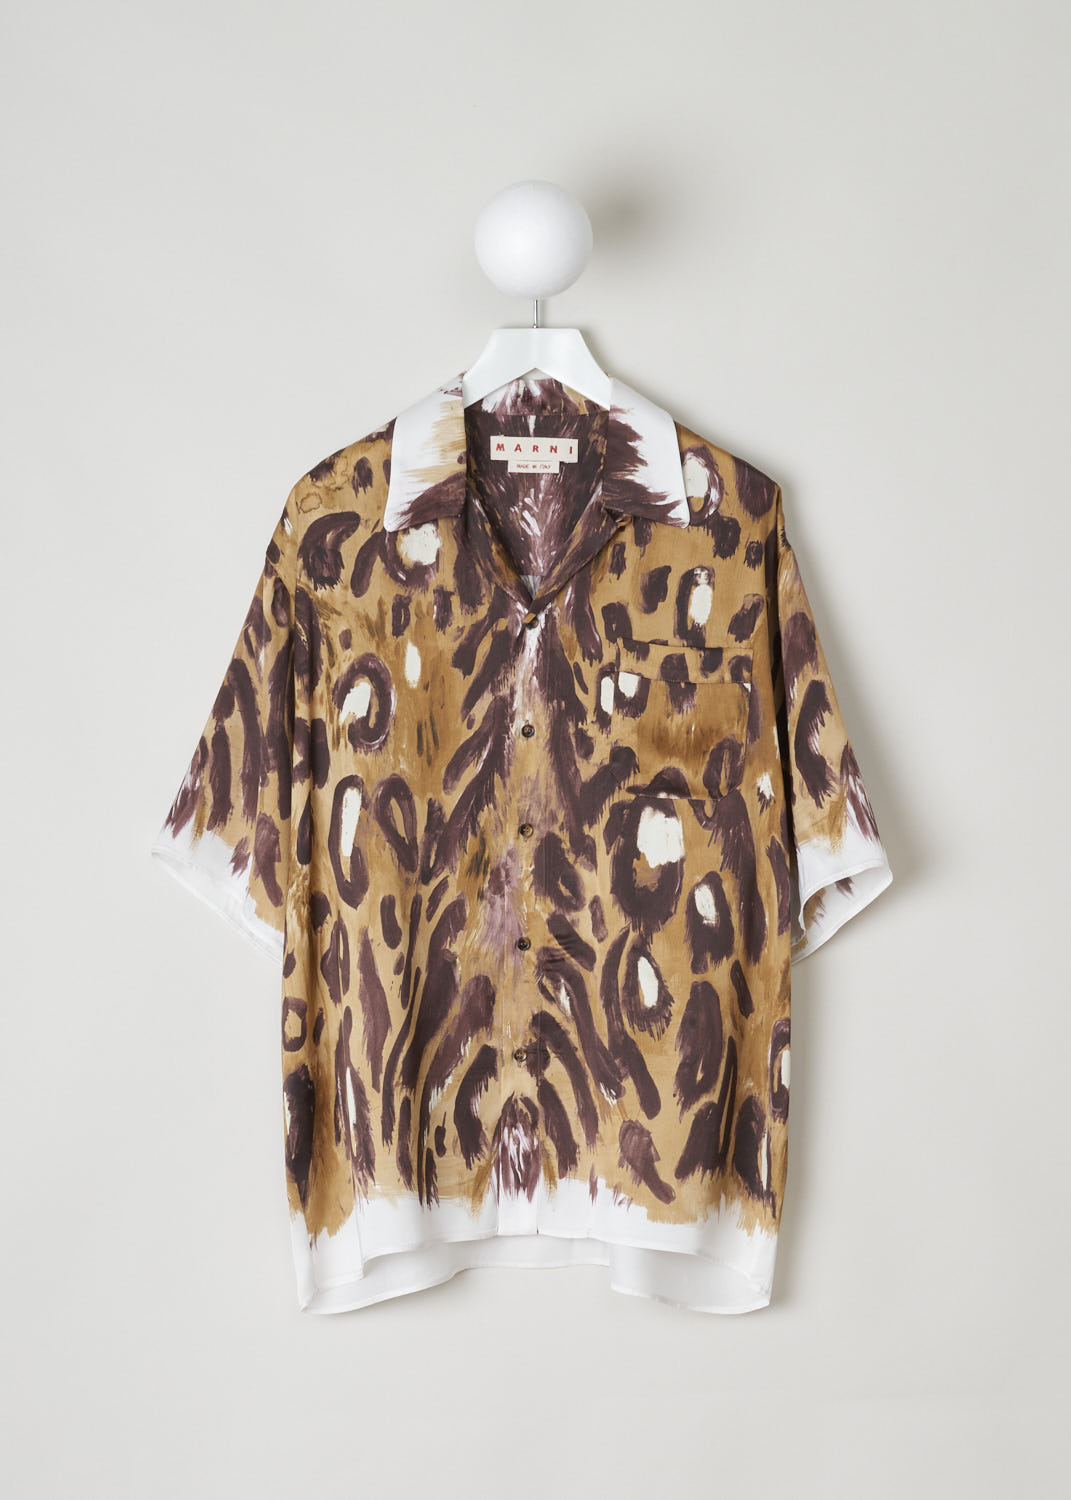 MARNI, ANIMAL PRINT BLOUSE WITH SHORT SLEEVES, CAMA0501A0_UTV912_WBM20, Brown, Print, Front, This loose fitting short sleeved blouse is made in a satin animal print. This blouse features a classic collar, a single breast pocket and front button fastening. This model has an asymmetrical finish, meaning the back is a little longer than the front.
